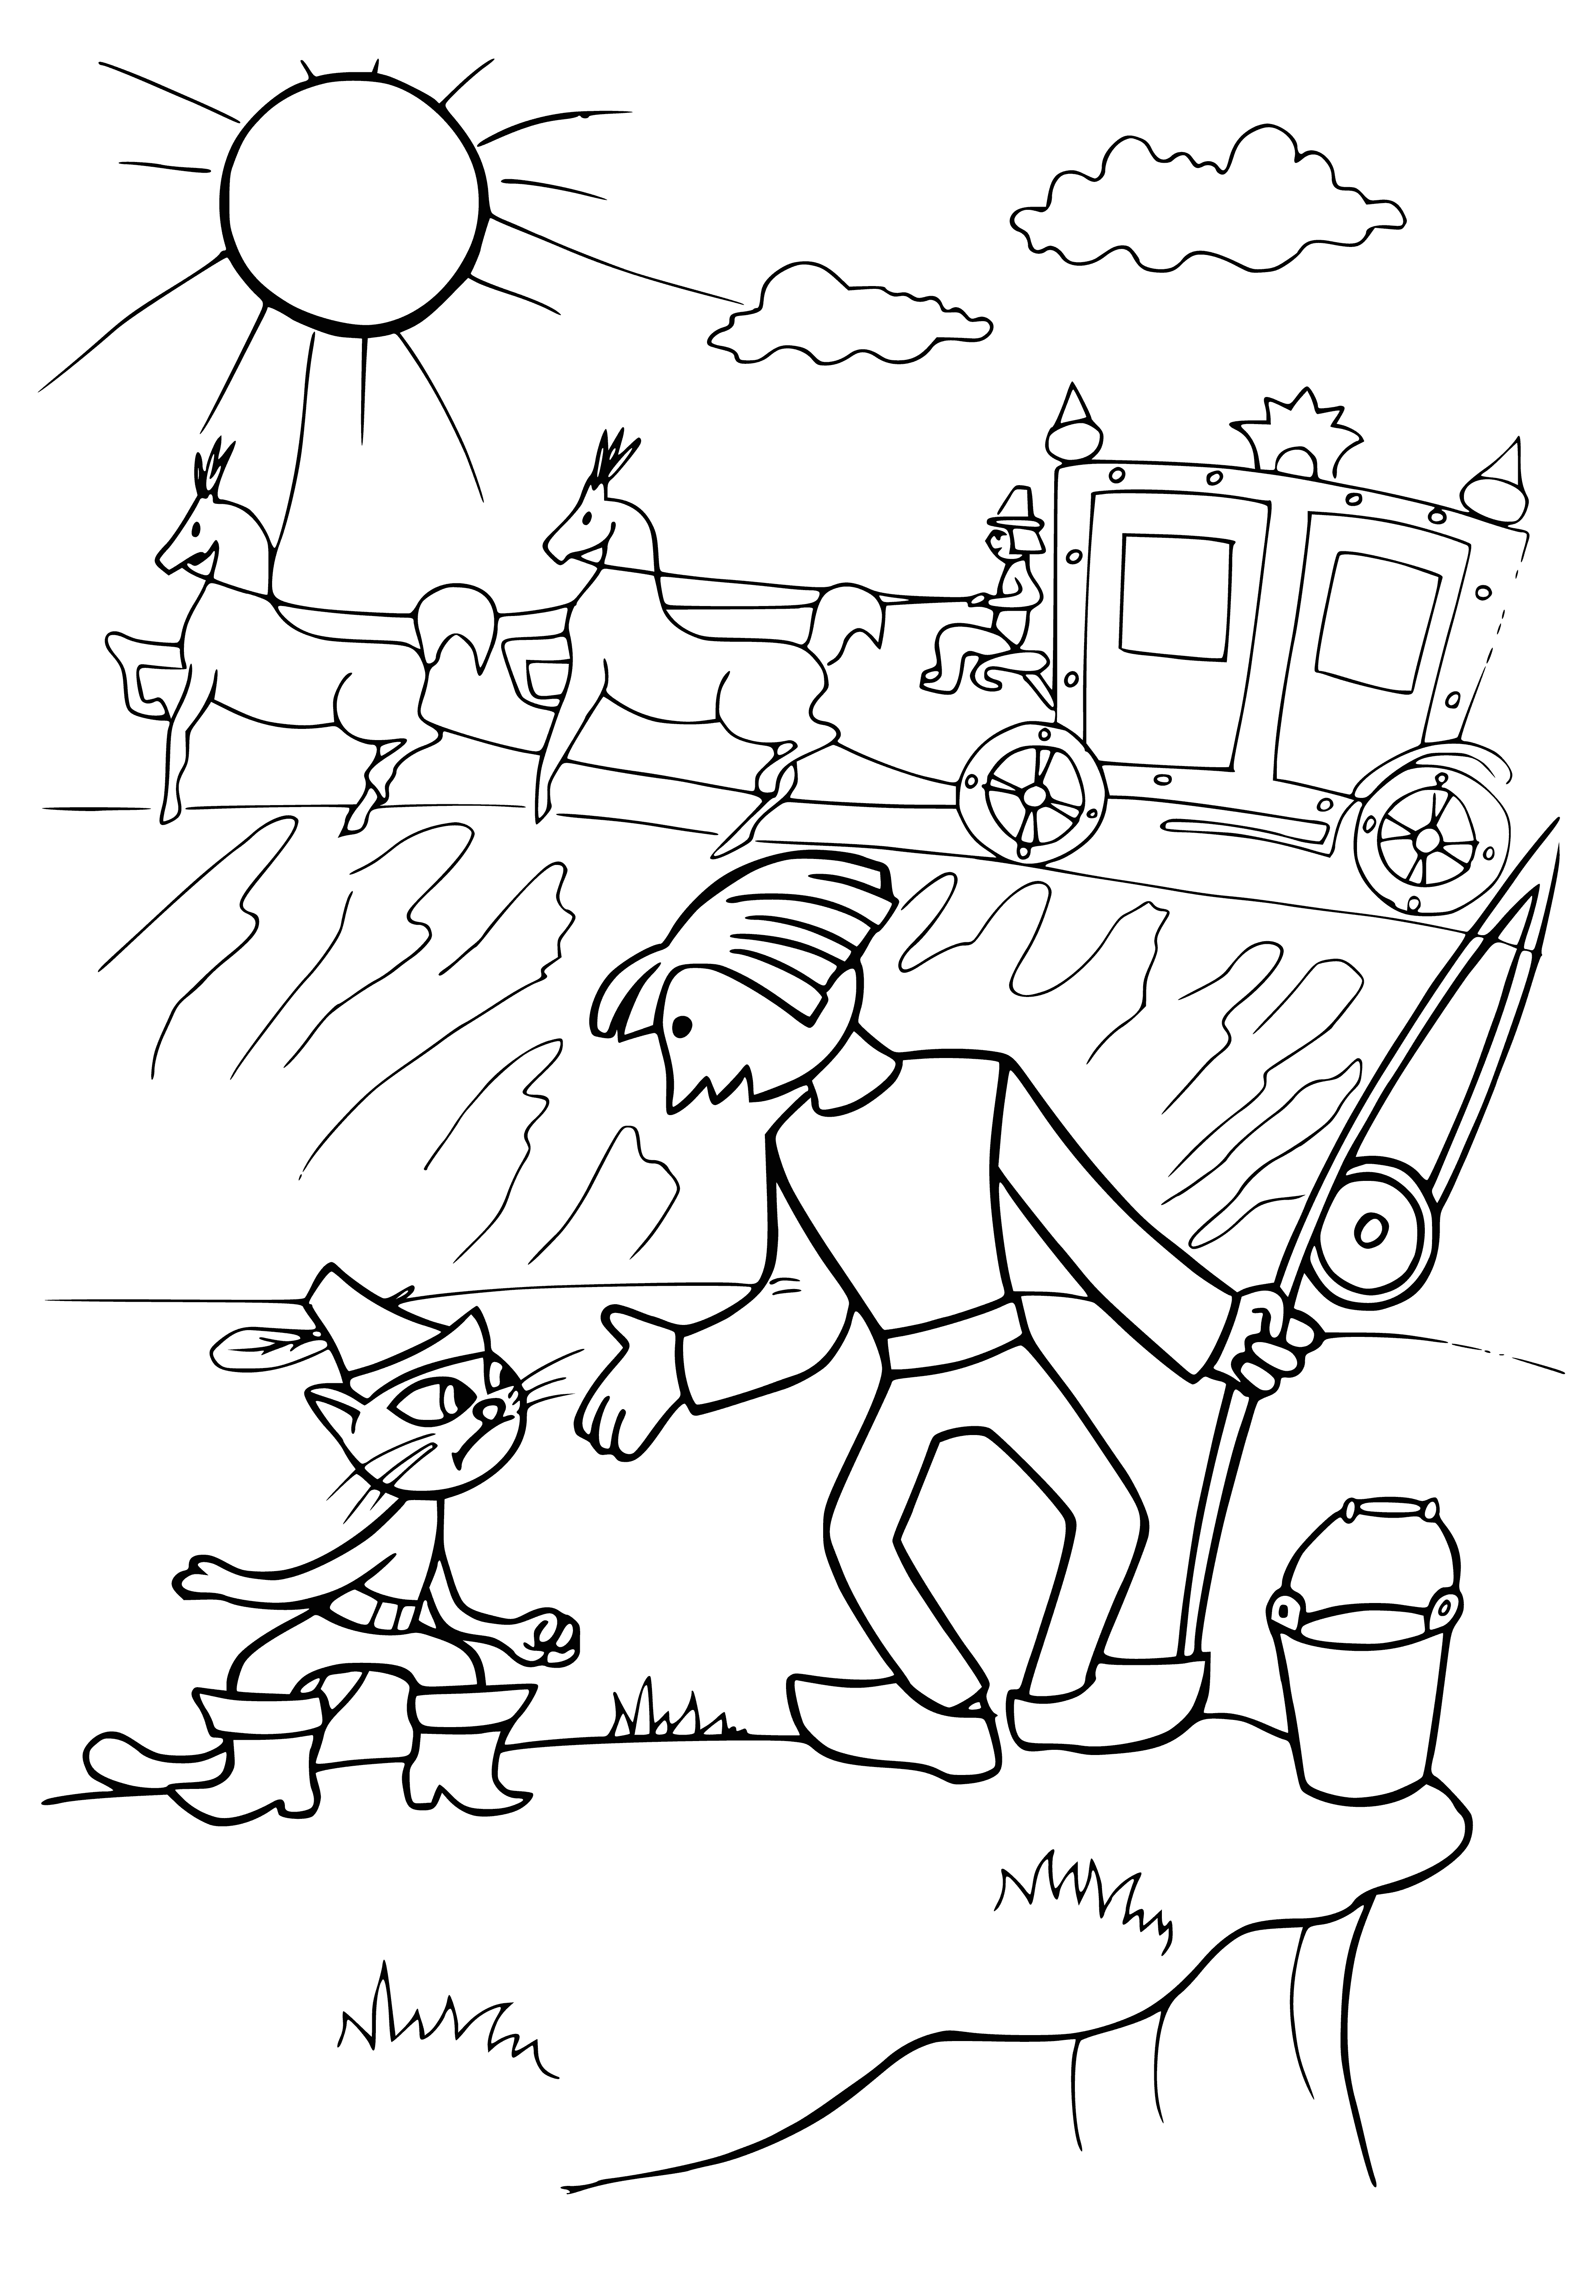 coloring page: Man in blue suit, red hat, long mustache, holding sword, in front of large castle.